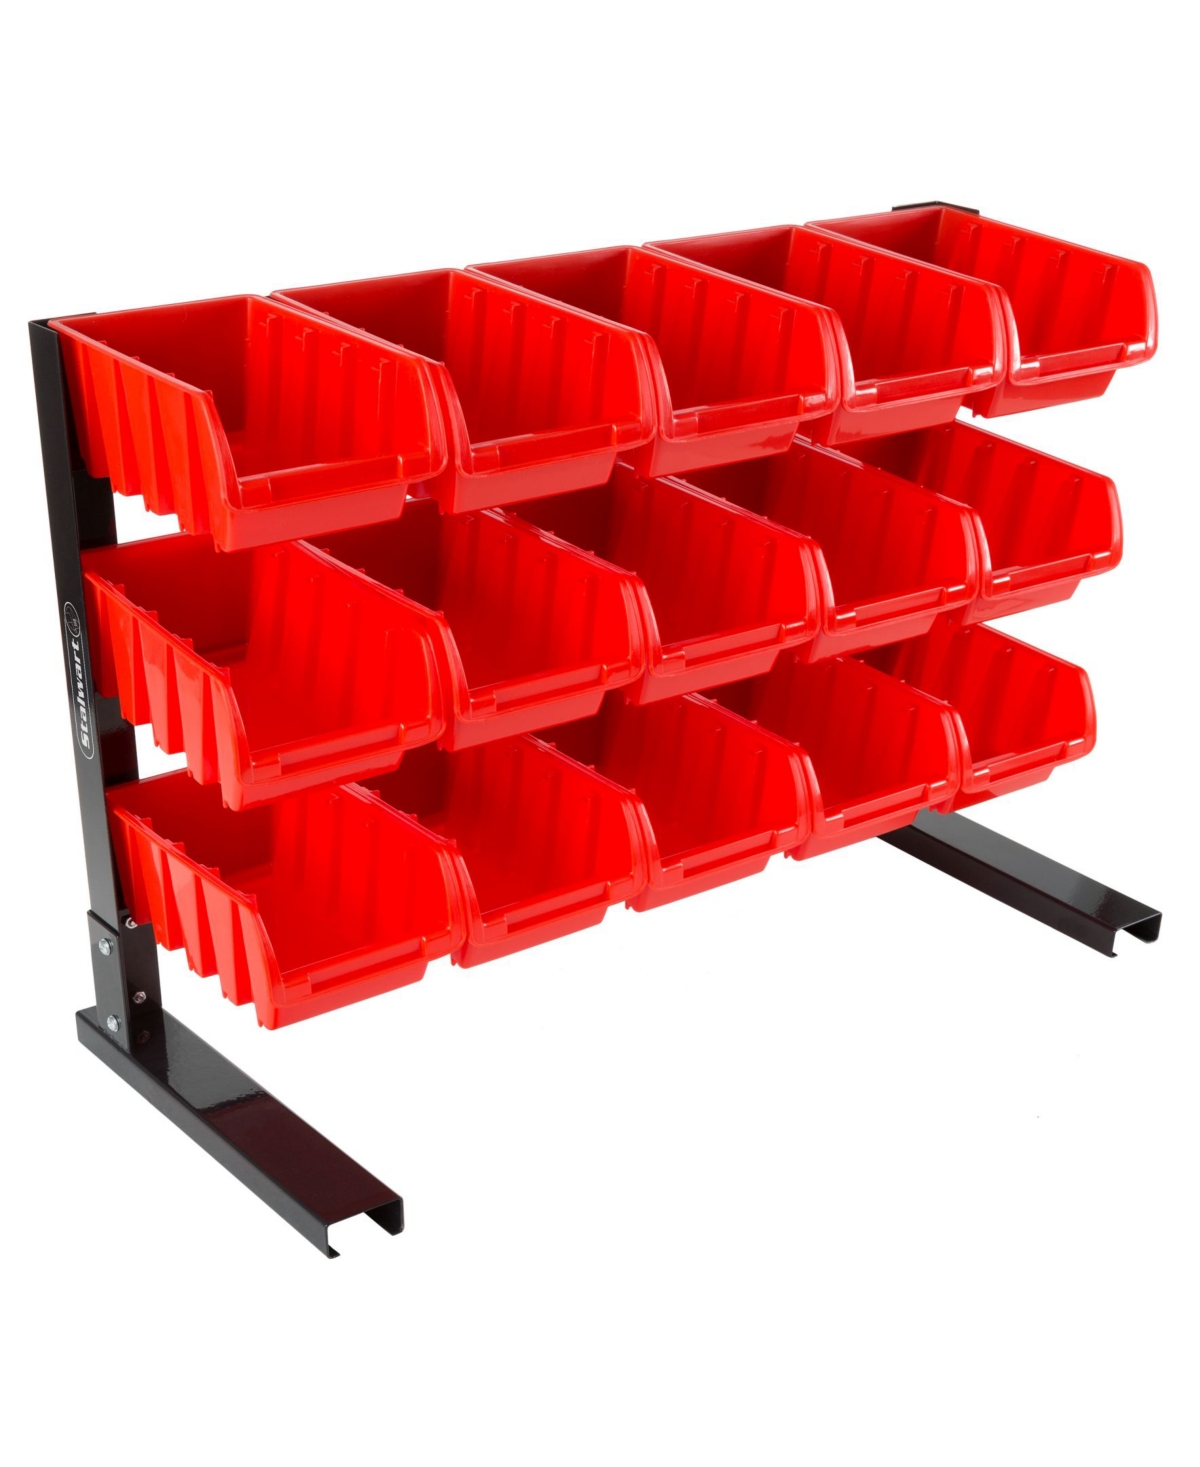 15 Bin Storage Rack organizer - Durable Carbon Steel with Stackable Plastic Drawers by Stalwart